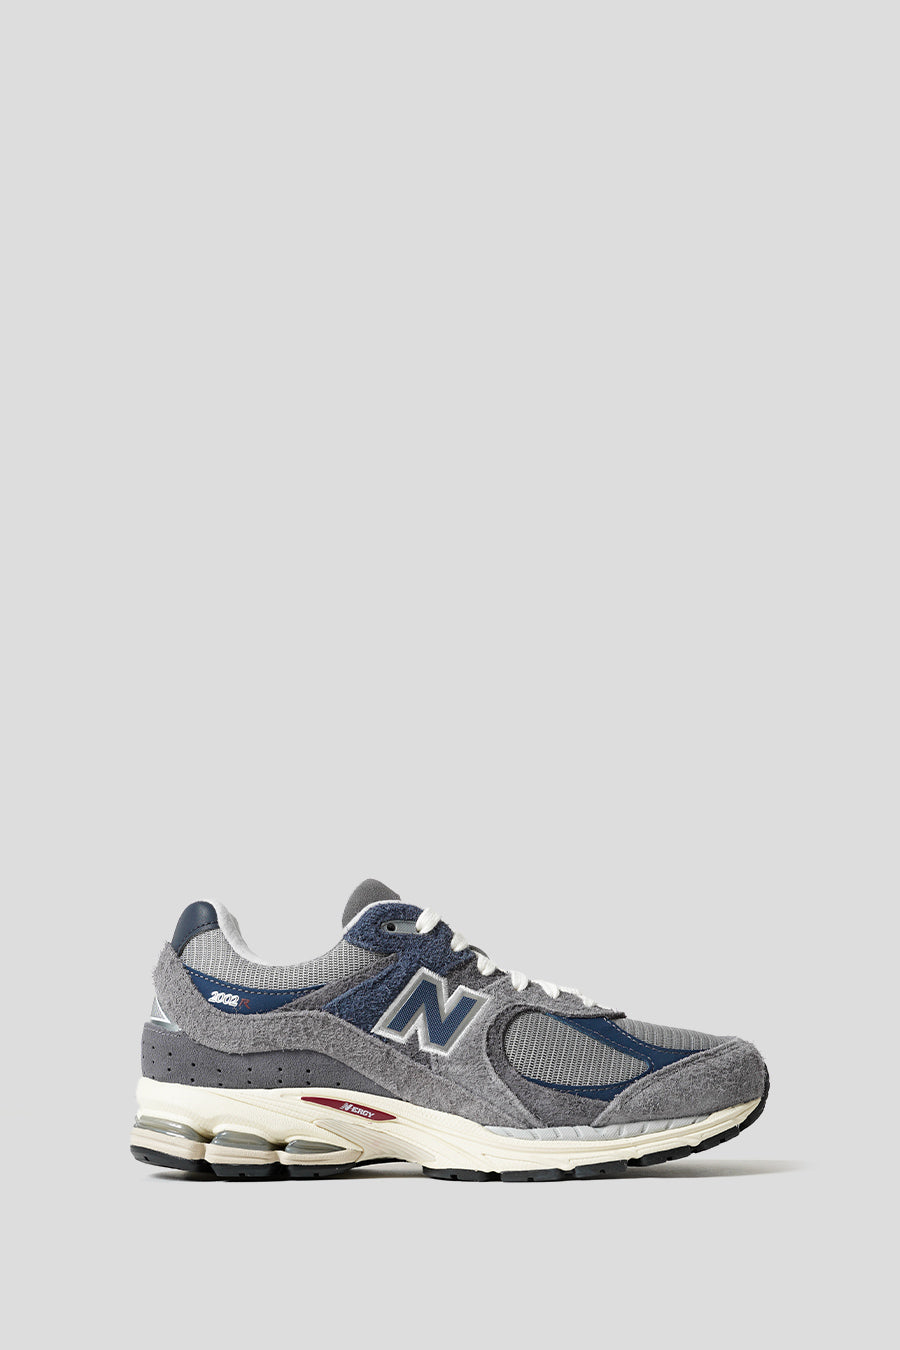 NEW BALANCE - 2002R NAVY AND CASTLEROCK SNEAKERS - LE LABO STORE